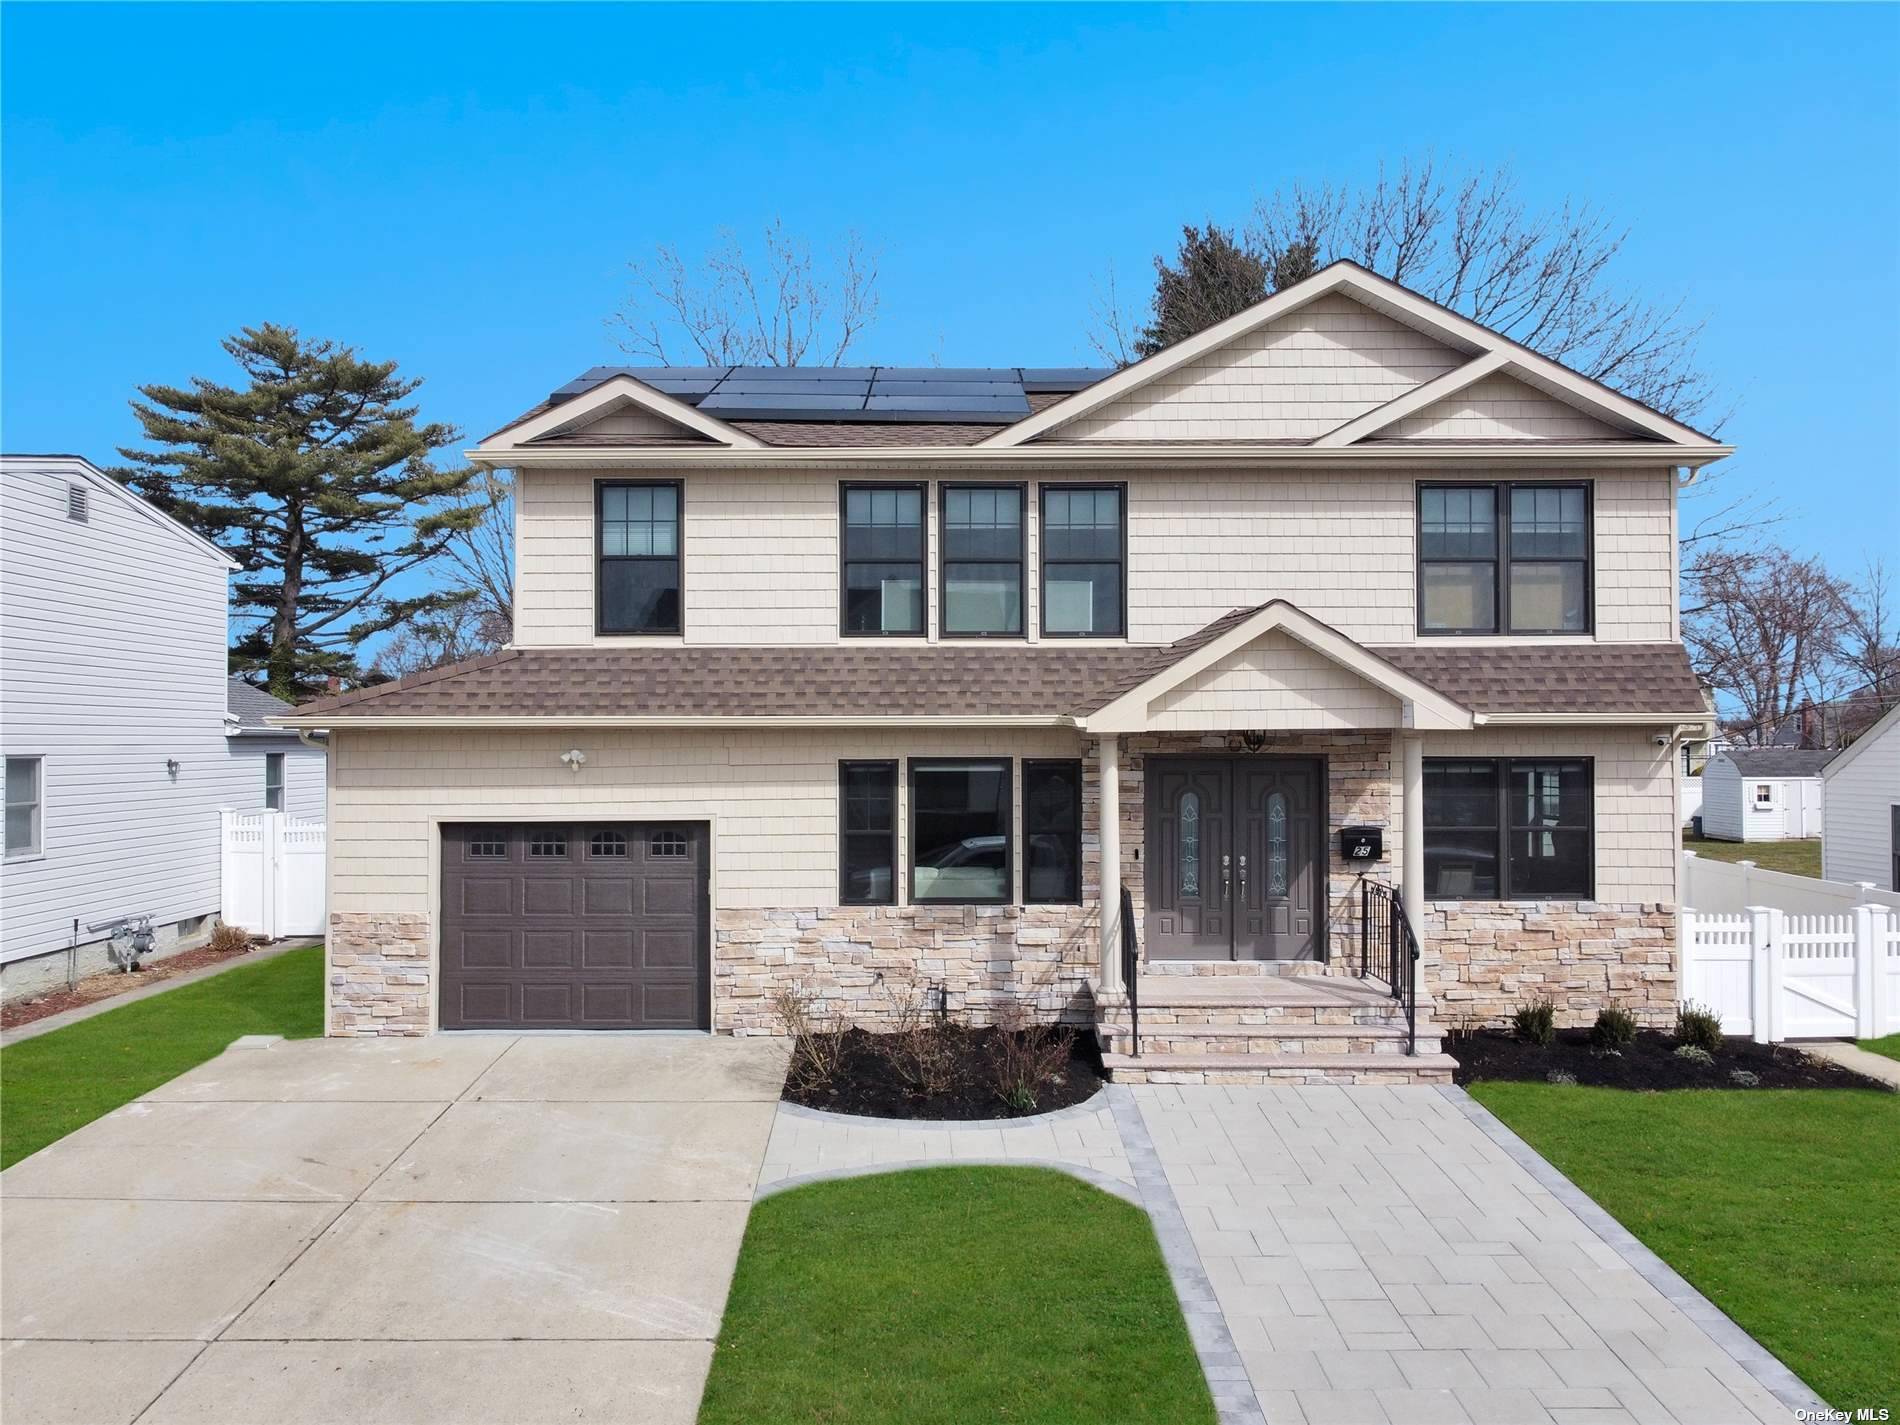 Presenting an exquisite new build on a generous lot in Hicksville.